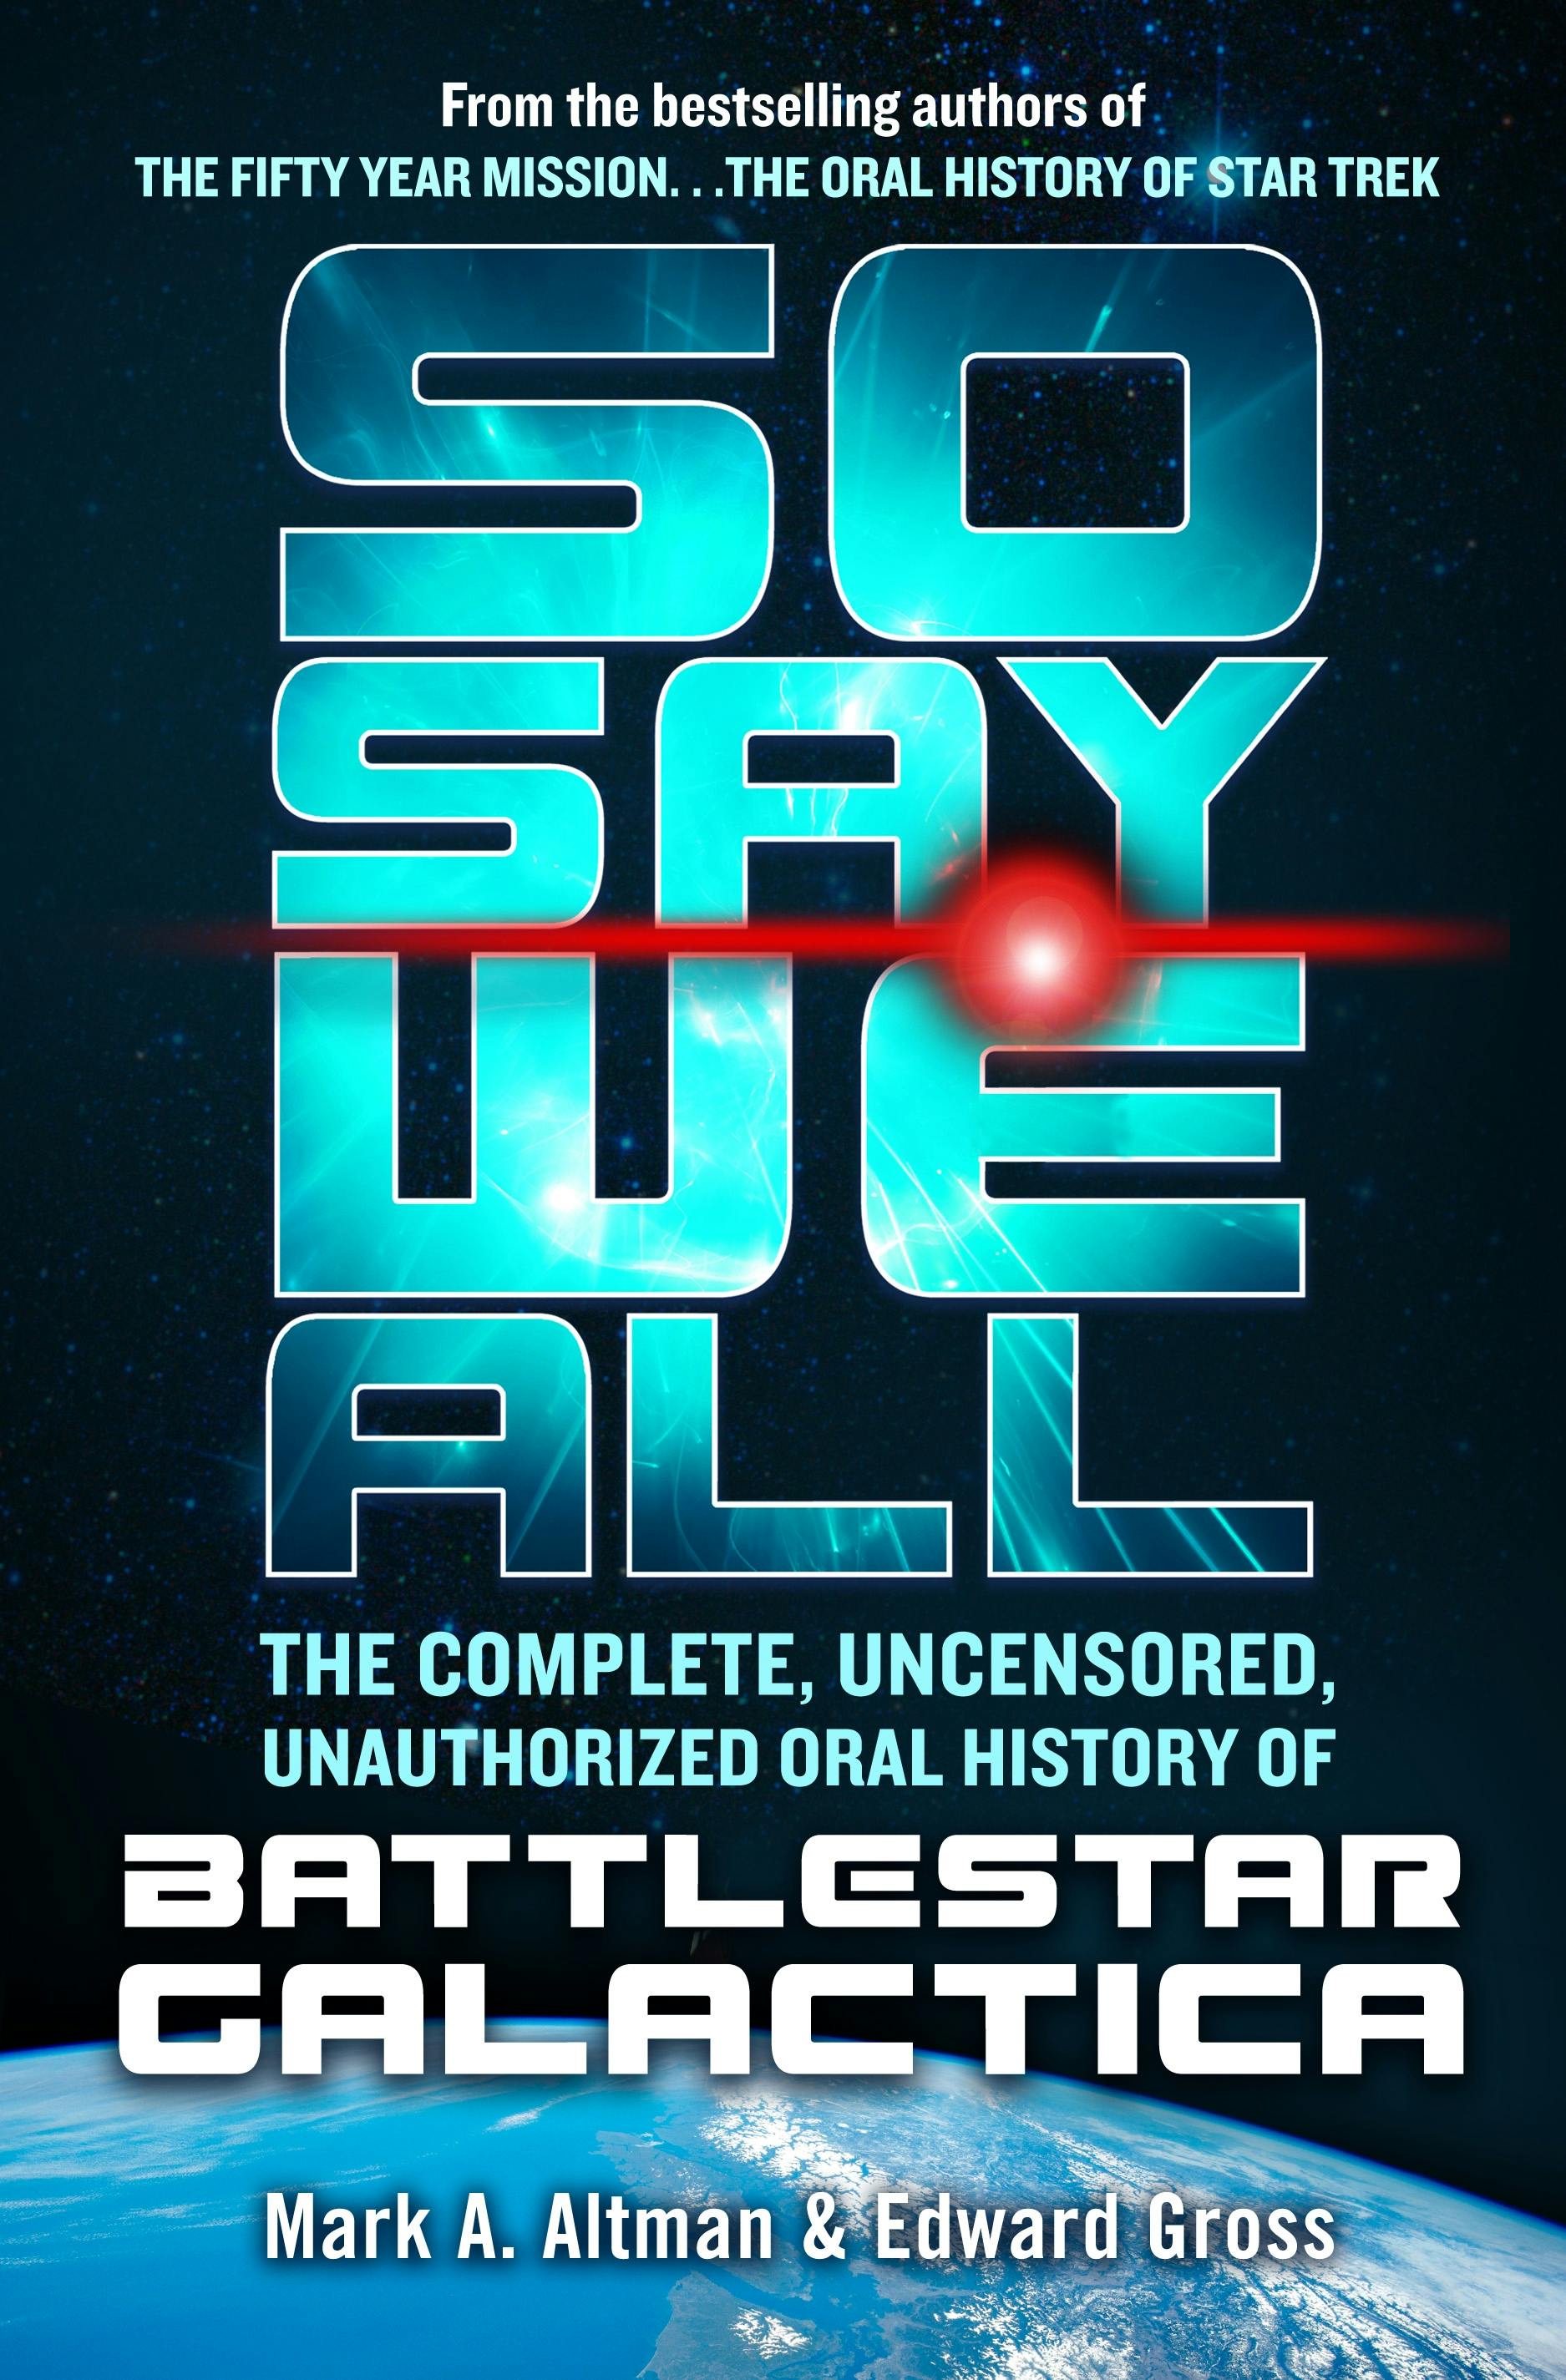 Cover for the book titled as: So Say We All: The Complete, Uncensored, Unauthorized Oral History of Battlestar Galactica